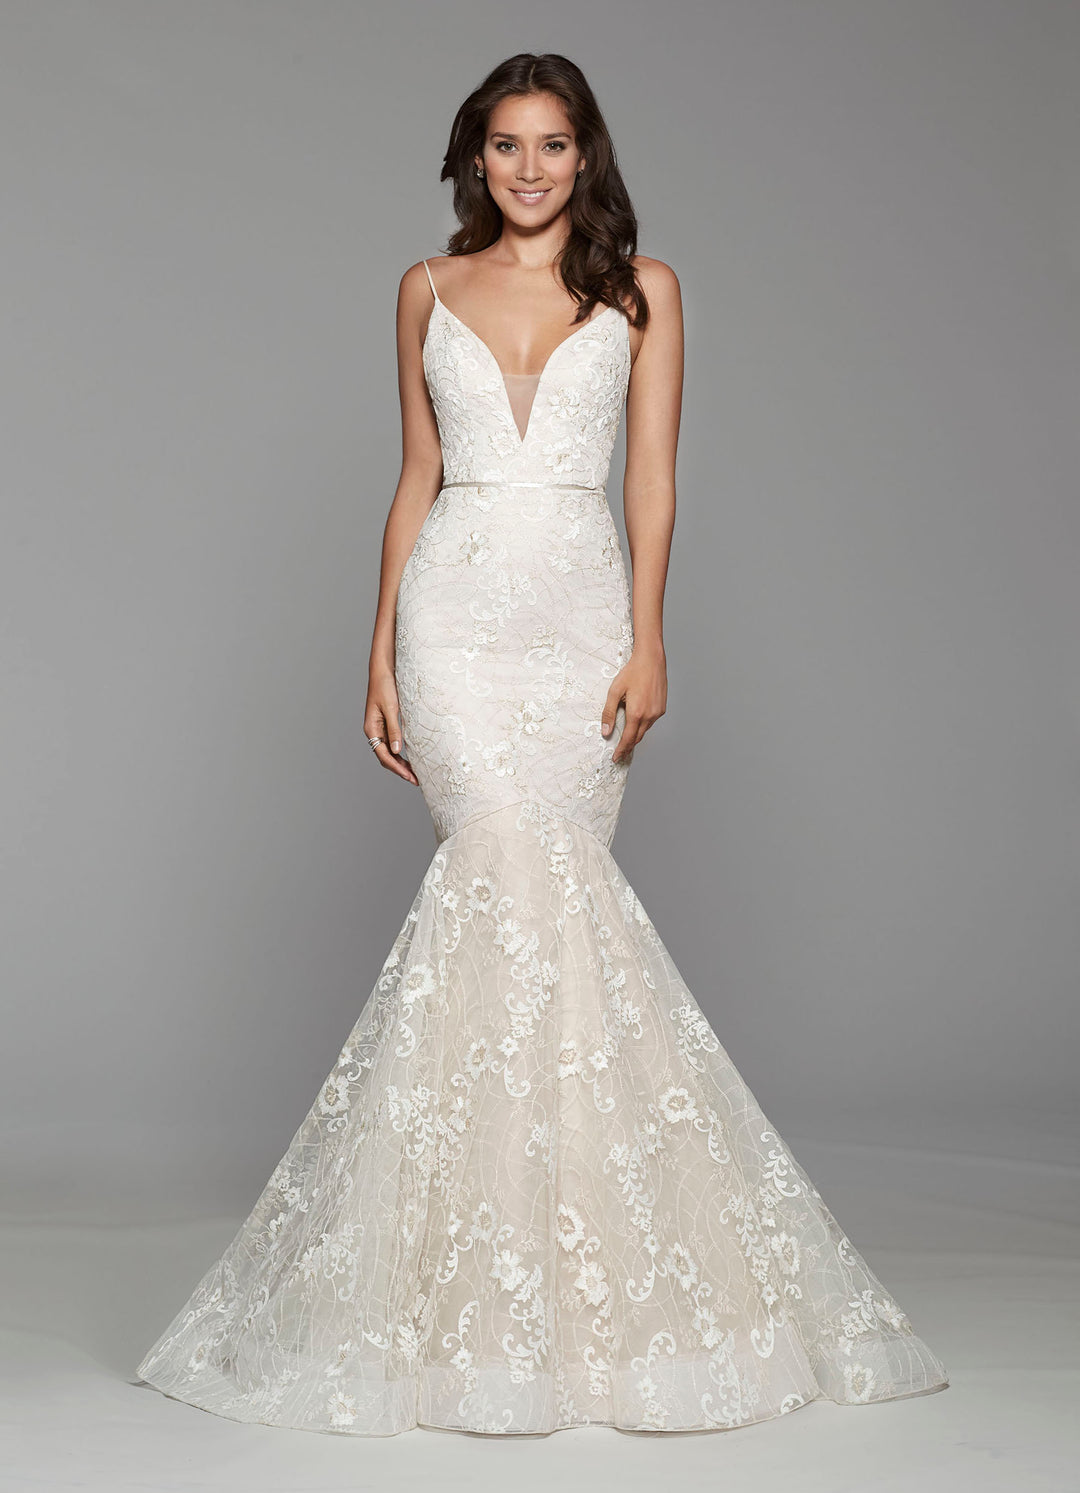 Tara Keely Gown Style 2751 Size 12